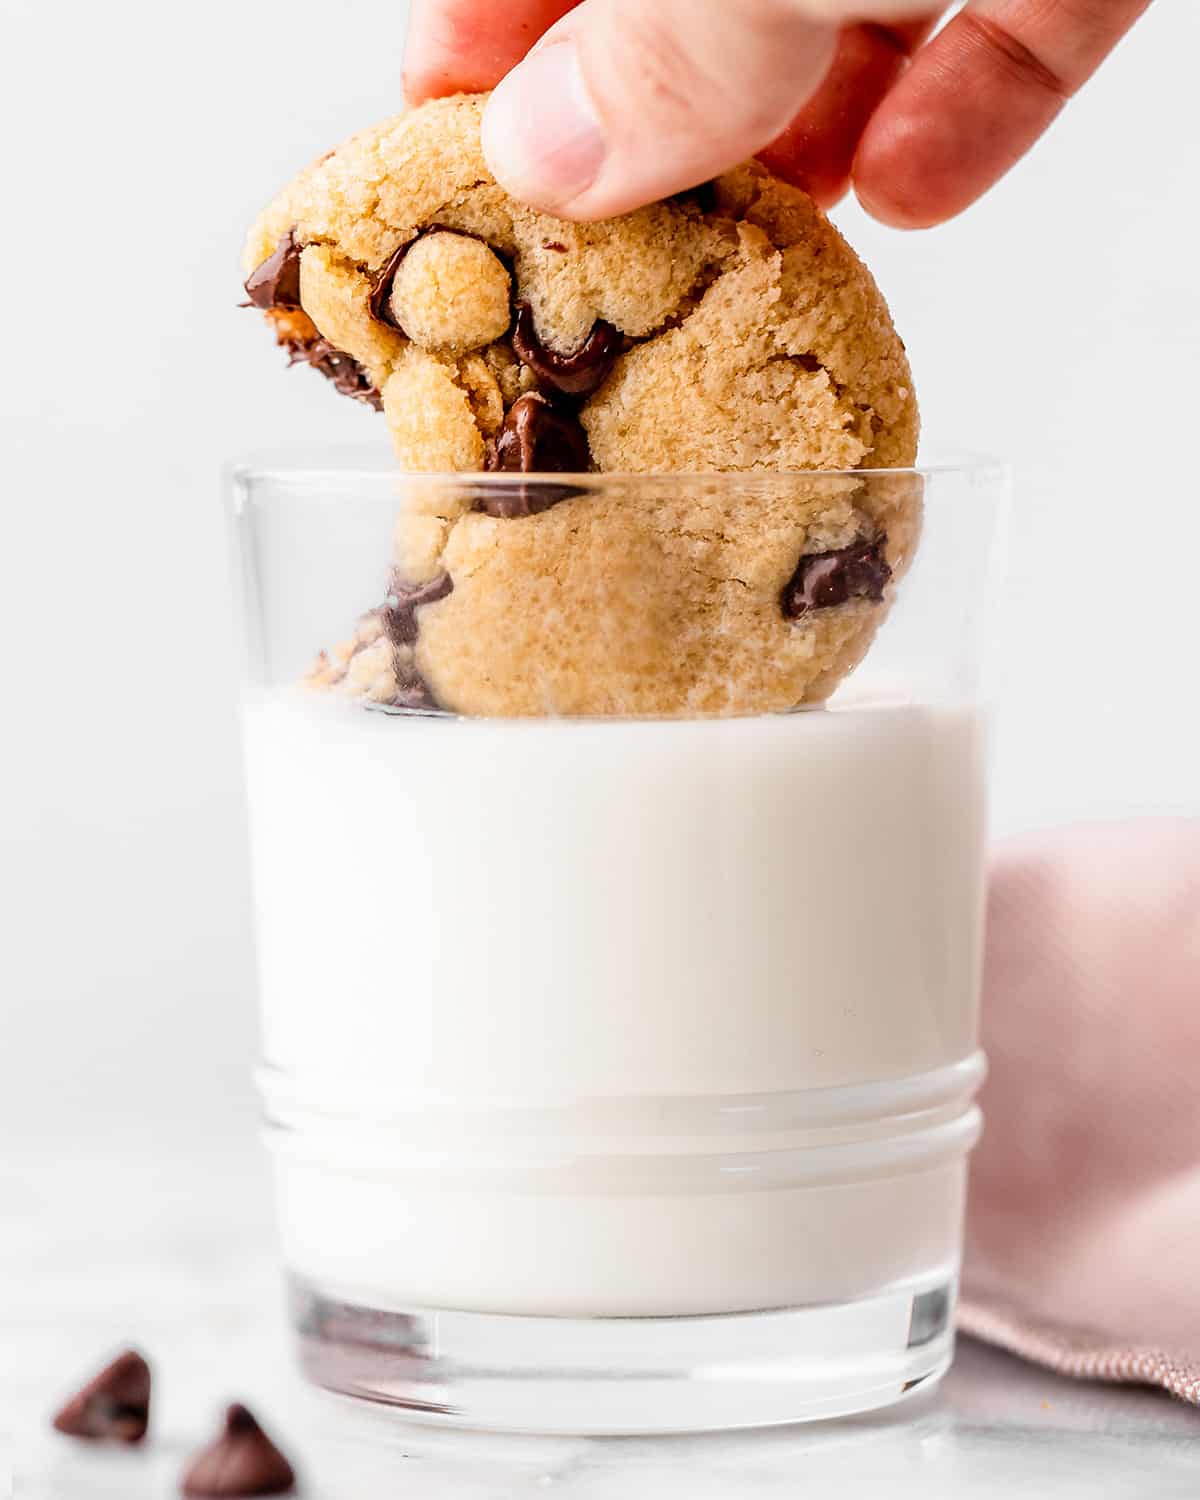 a Small Batch Chocolate Chip Cookie being dipped into a glass of milk